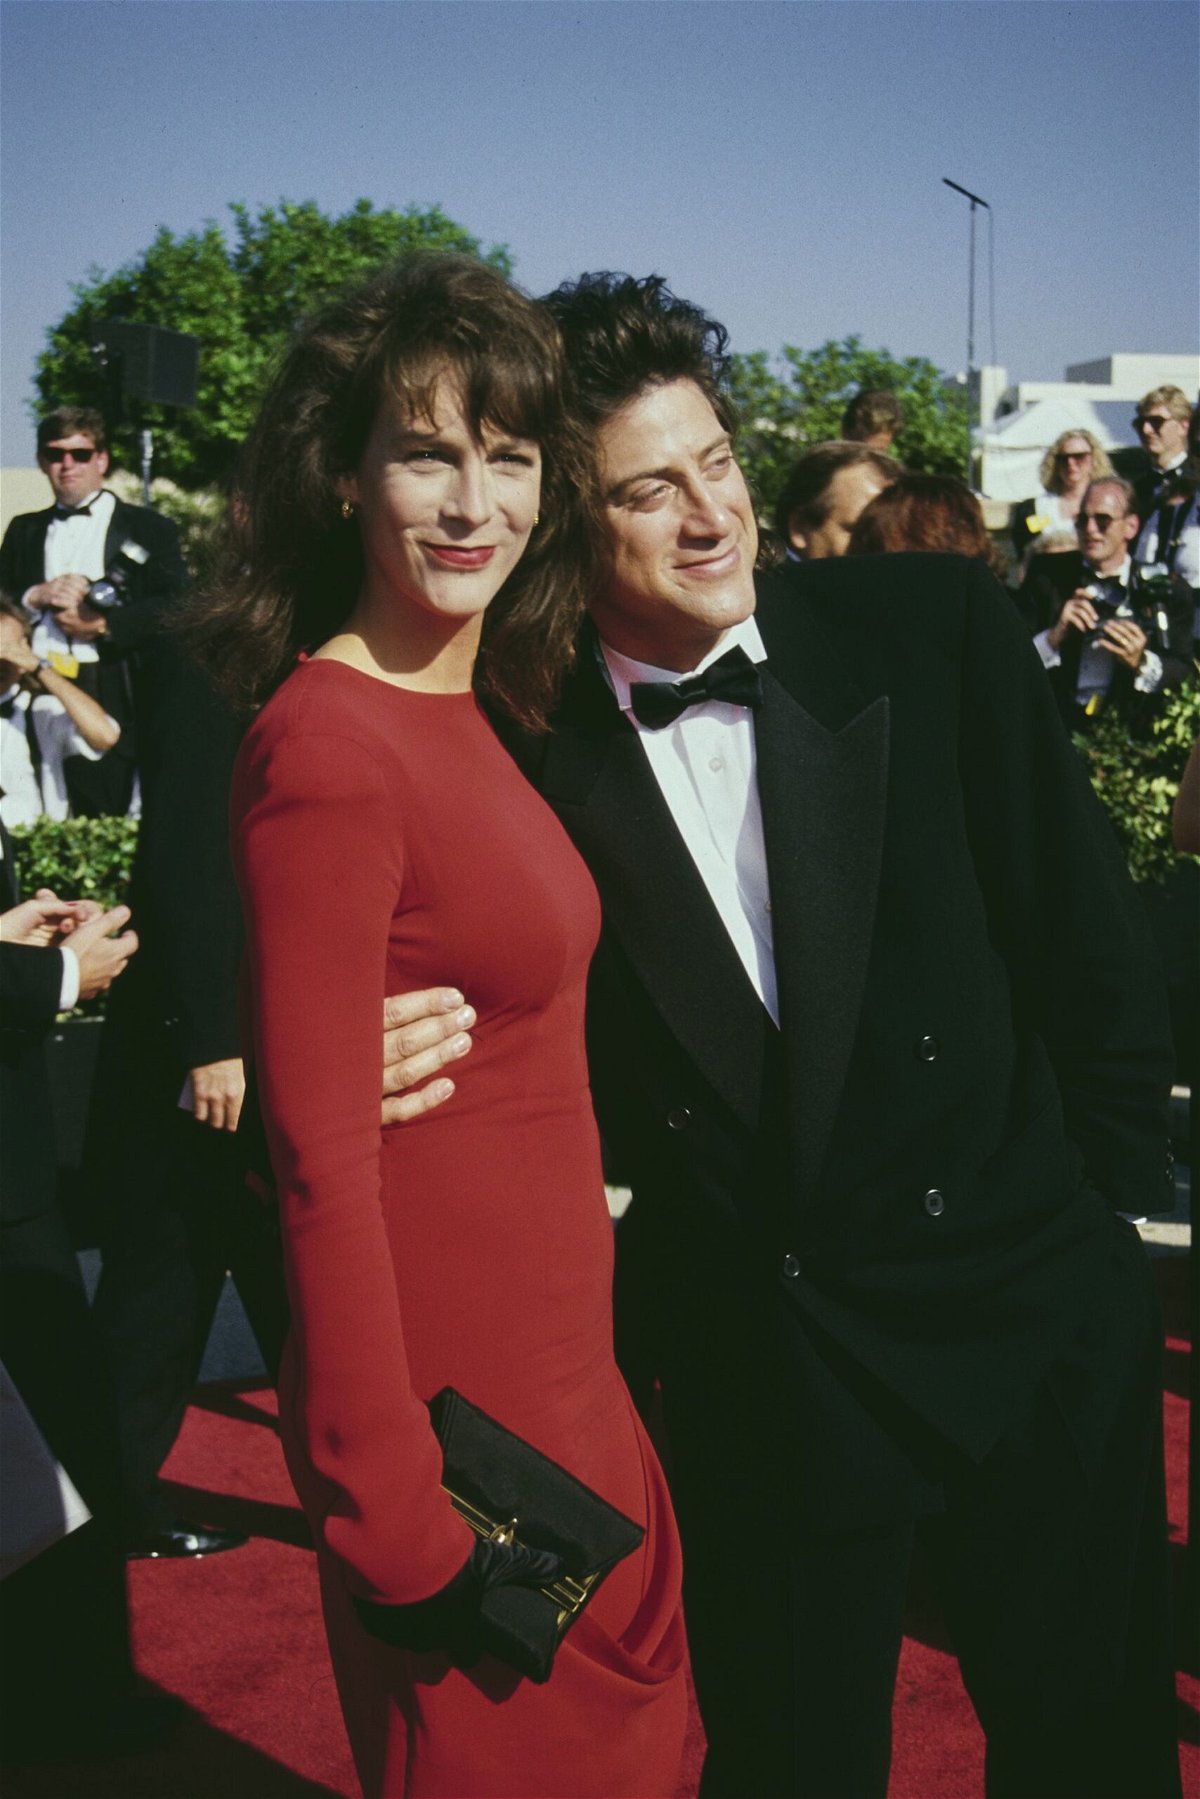 Jamie Lee Curtis and actor Richard Lewis attend the 42nd Annual Primetime Emmy Awards at the Pasadena Civic Auditorium in Pasadena, California, United States, 16th September 1990. Curtis credits Lewis with her sobriety.